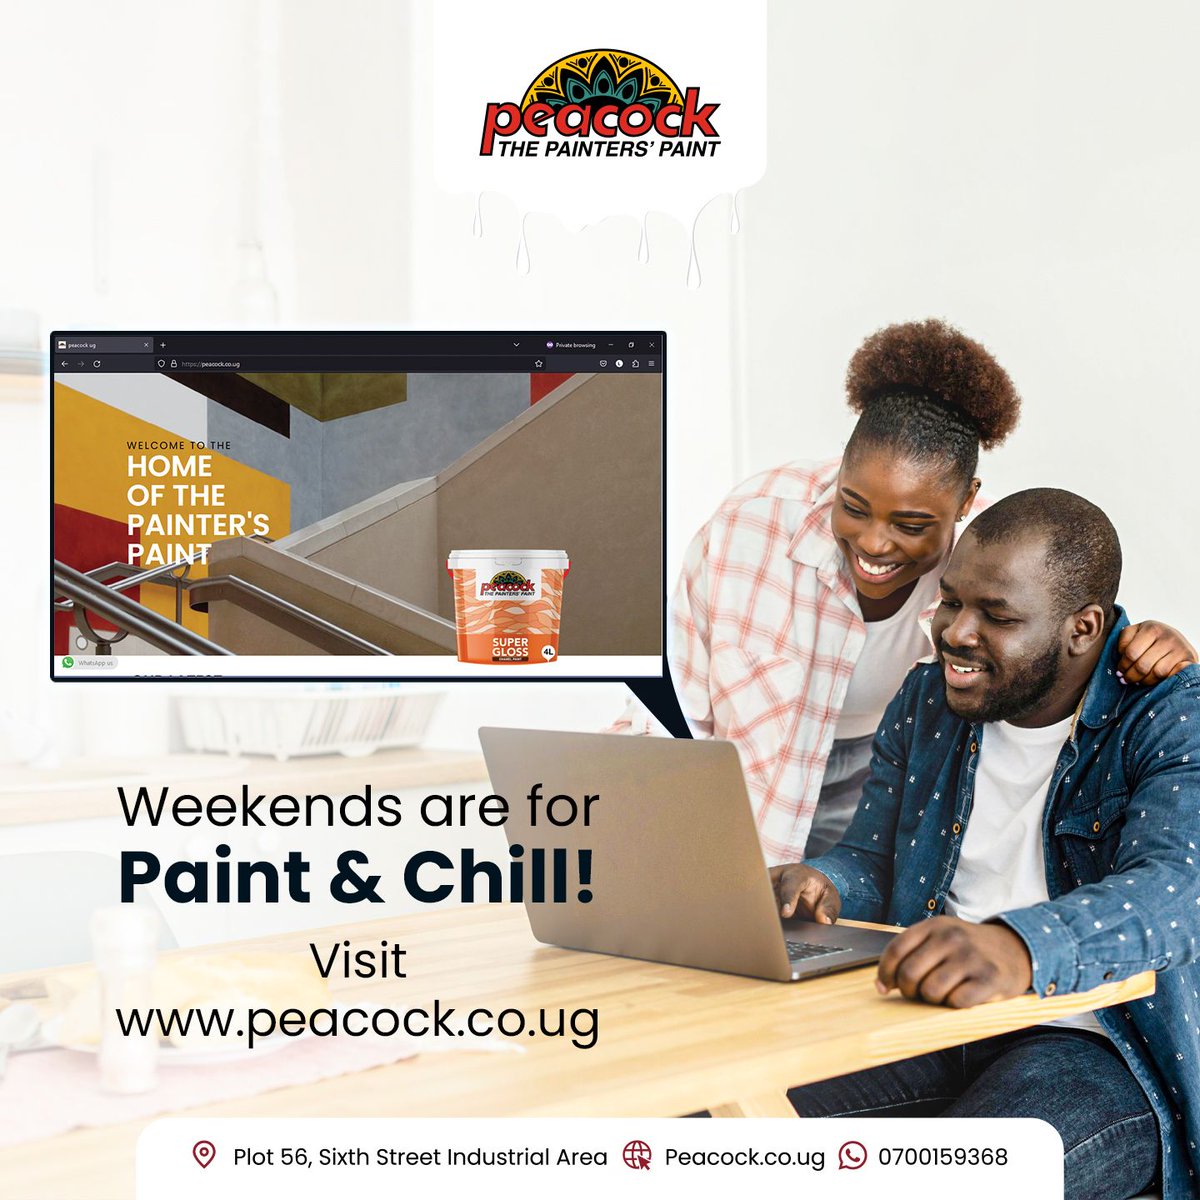 Relax and bring your painting ideas to life. 🙂🖌️

#PaintAndChill
#PeacockPaints #ThePaintersPaint